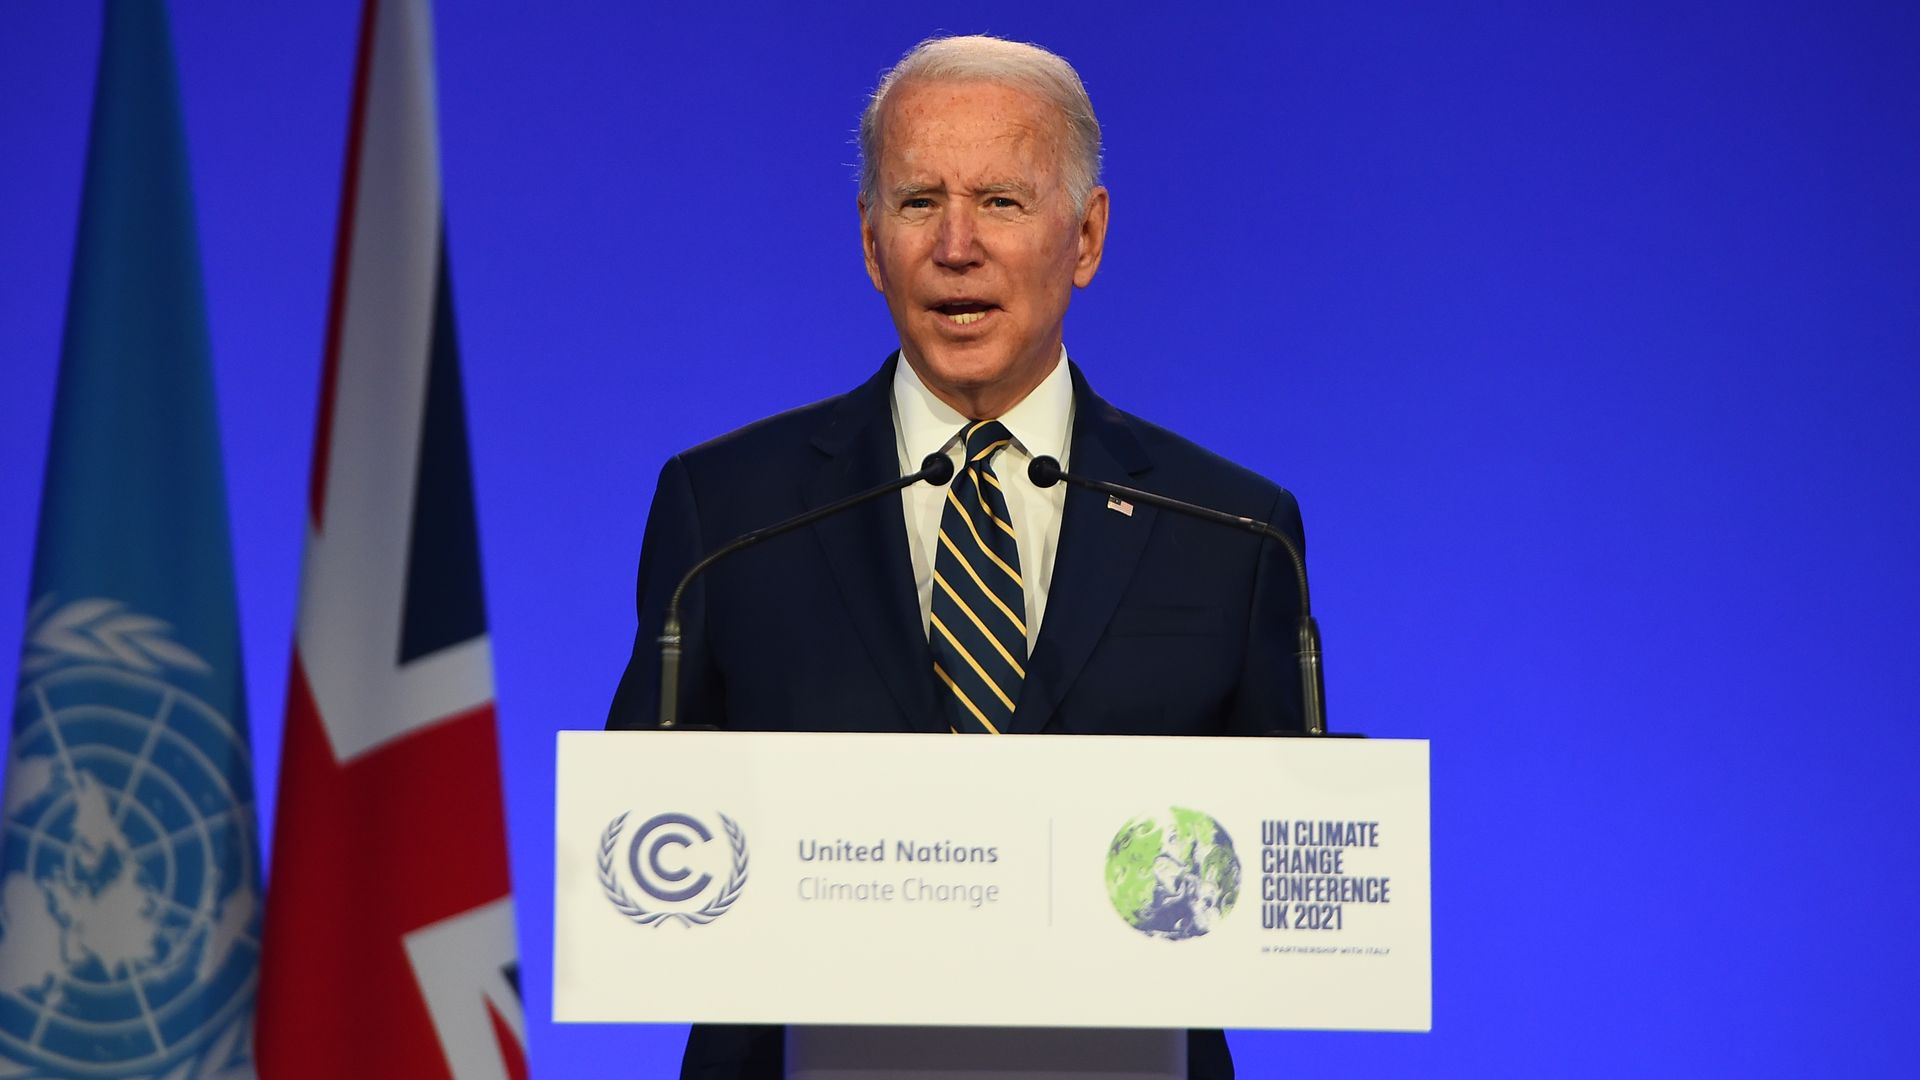  President Joe Biden presents his national statement during day two of COP26 at SECC on November 1, 2021 in Glasgow, United Kingdom.